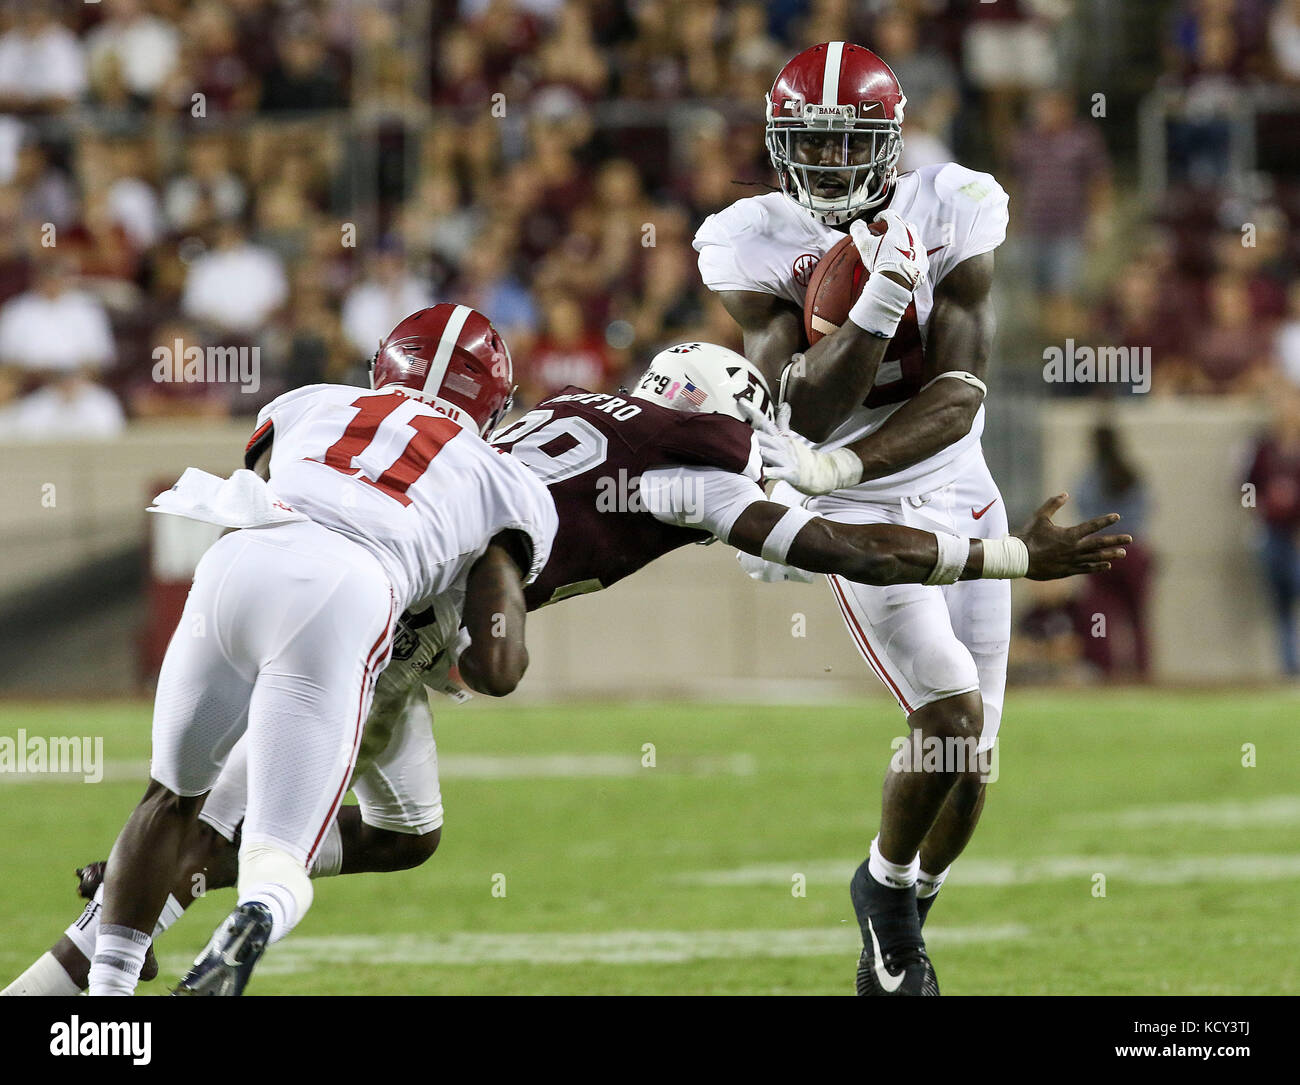 October 6, 2017: Alabama Crimson Tide running back Bo Scarbrough (9) pushes off a defender in the third quarter during the NCAA football game between the Alabama Crimson Tide and the Texas A&M Aggies at Kyle Field in College Station, TX; John Glaser/CSM. Stock Photo